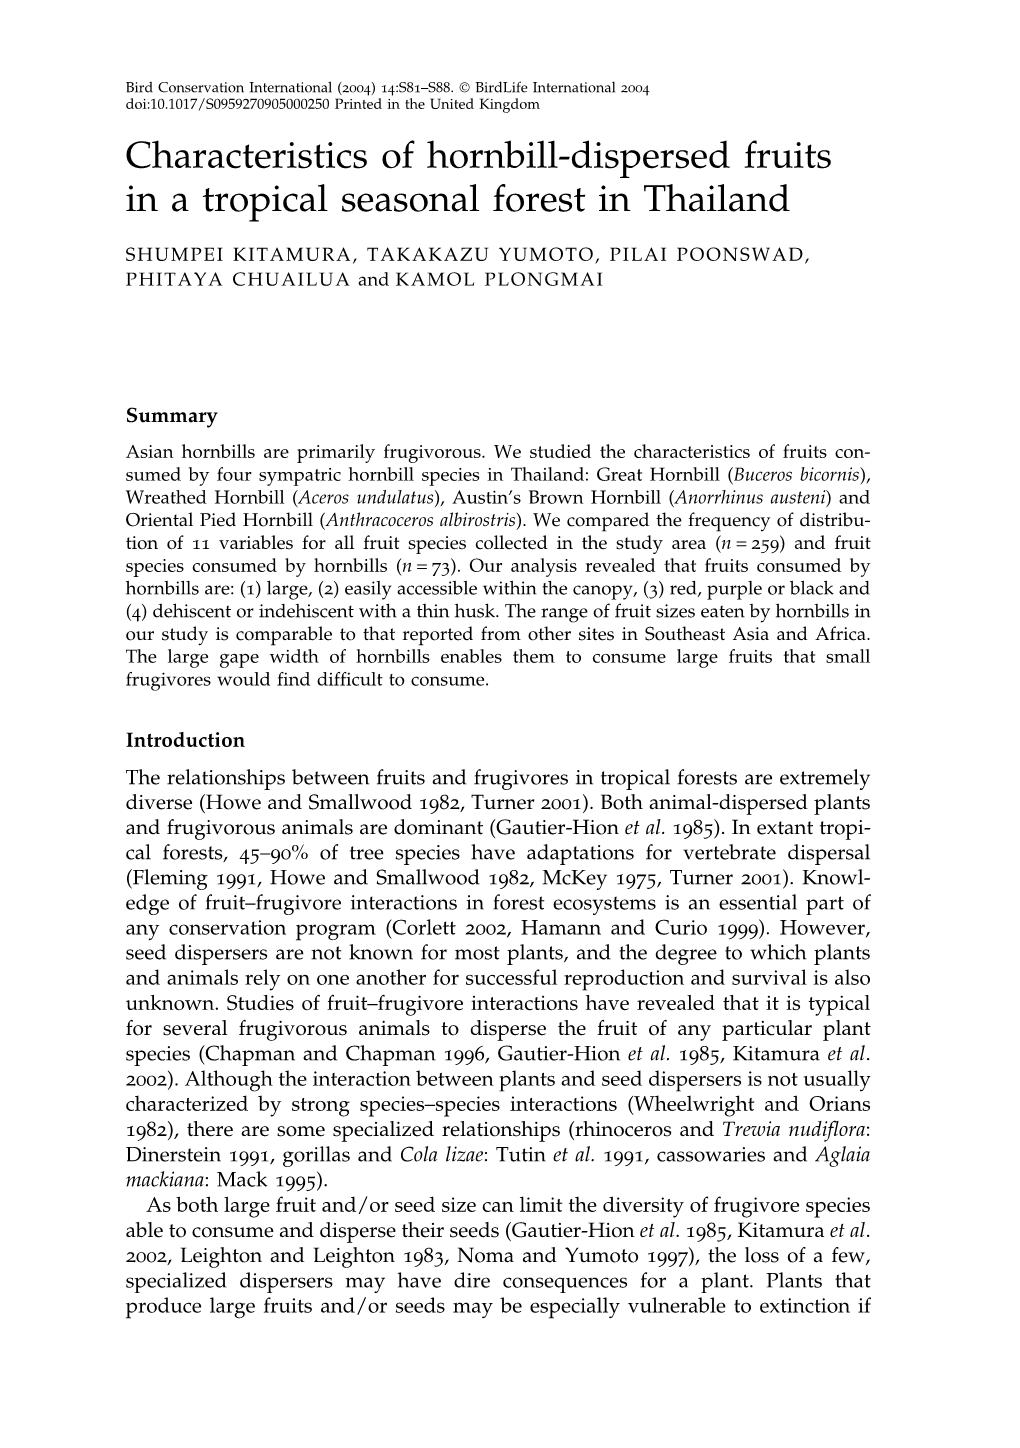 Characteristics of Hornbill-Dispersed Fruits in a Tropical Seasonal Forest in Thailand